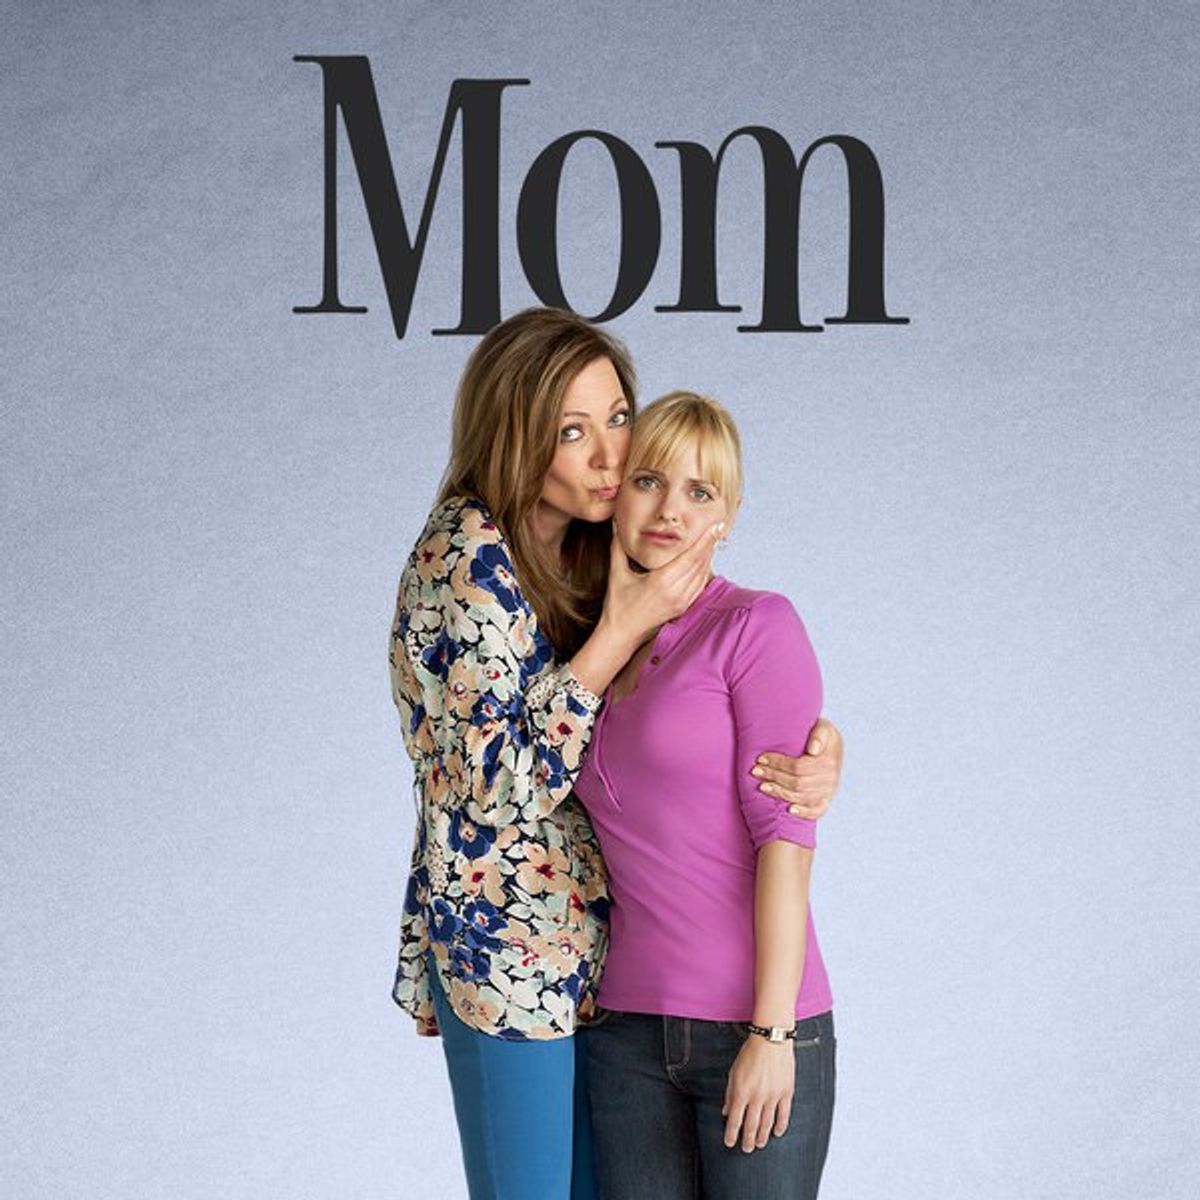 "Mom" Is One Of The Best, Most Underrated TV Shows You'll Ever Watch